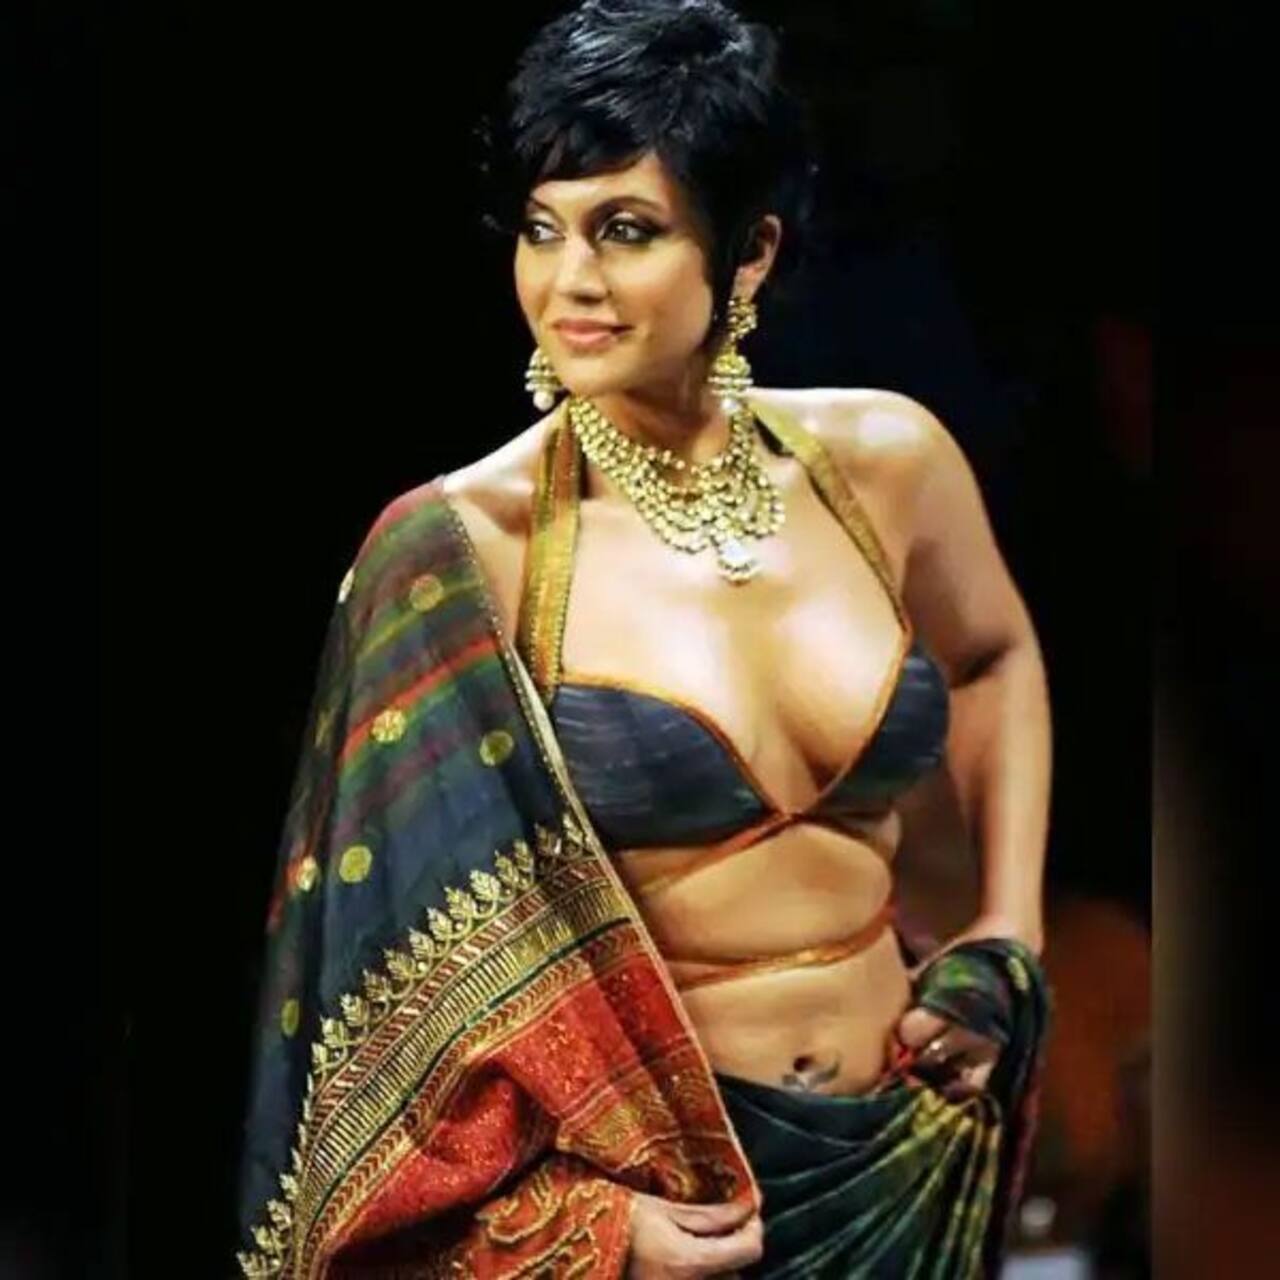 Mandira Bedi birthday special: 7 pics that prove she is a stunner at 48